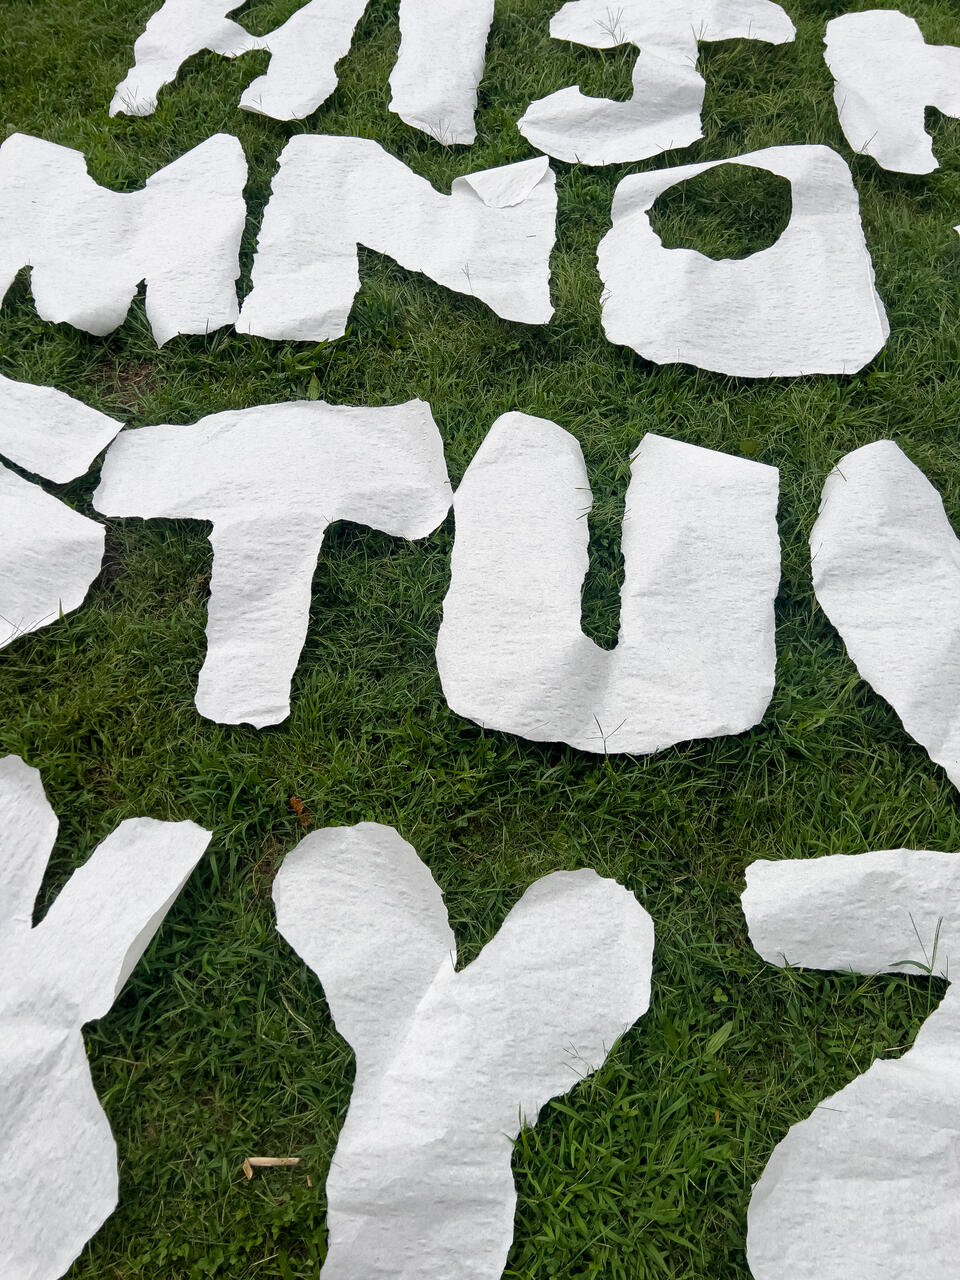 A photo of large letters of the alphabet lying on green grass.